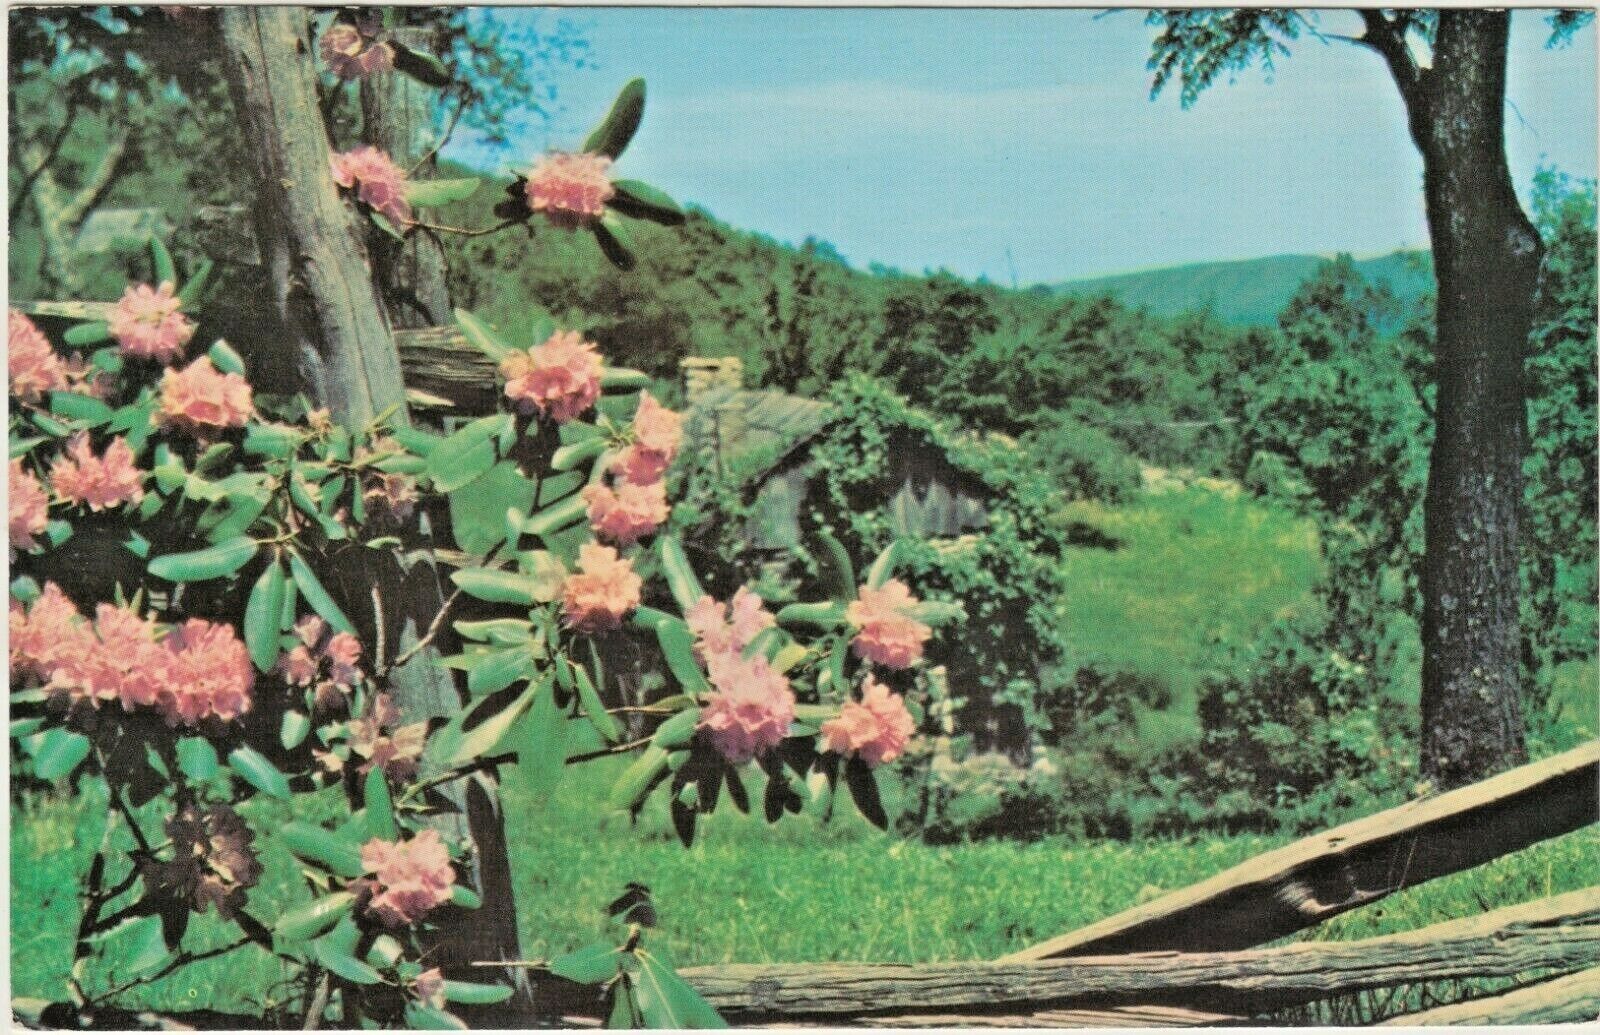 Catawba Rhododendron lends Beauty to a Split-Rail Fence at a Mountain Homestead